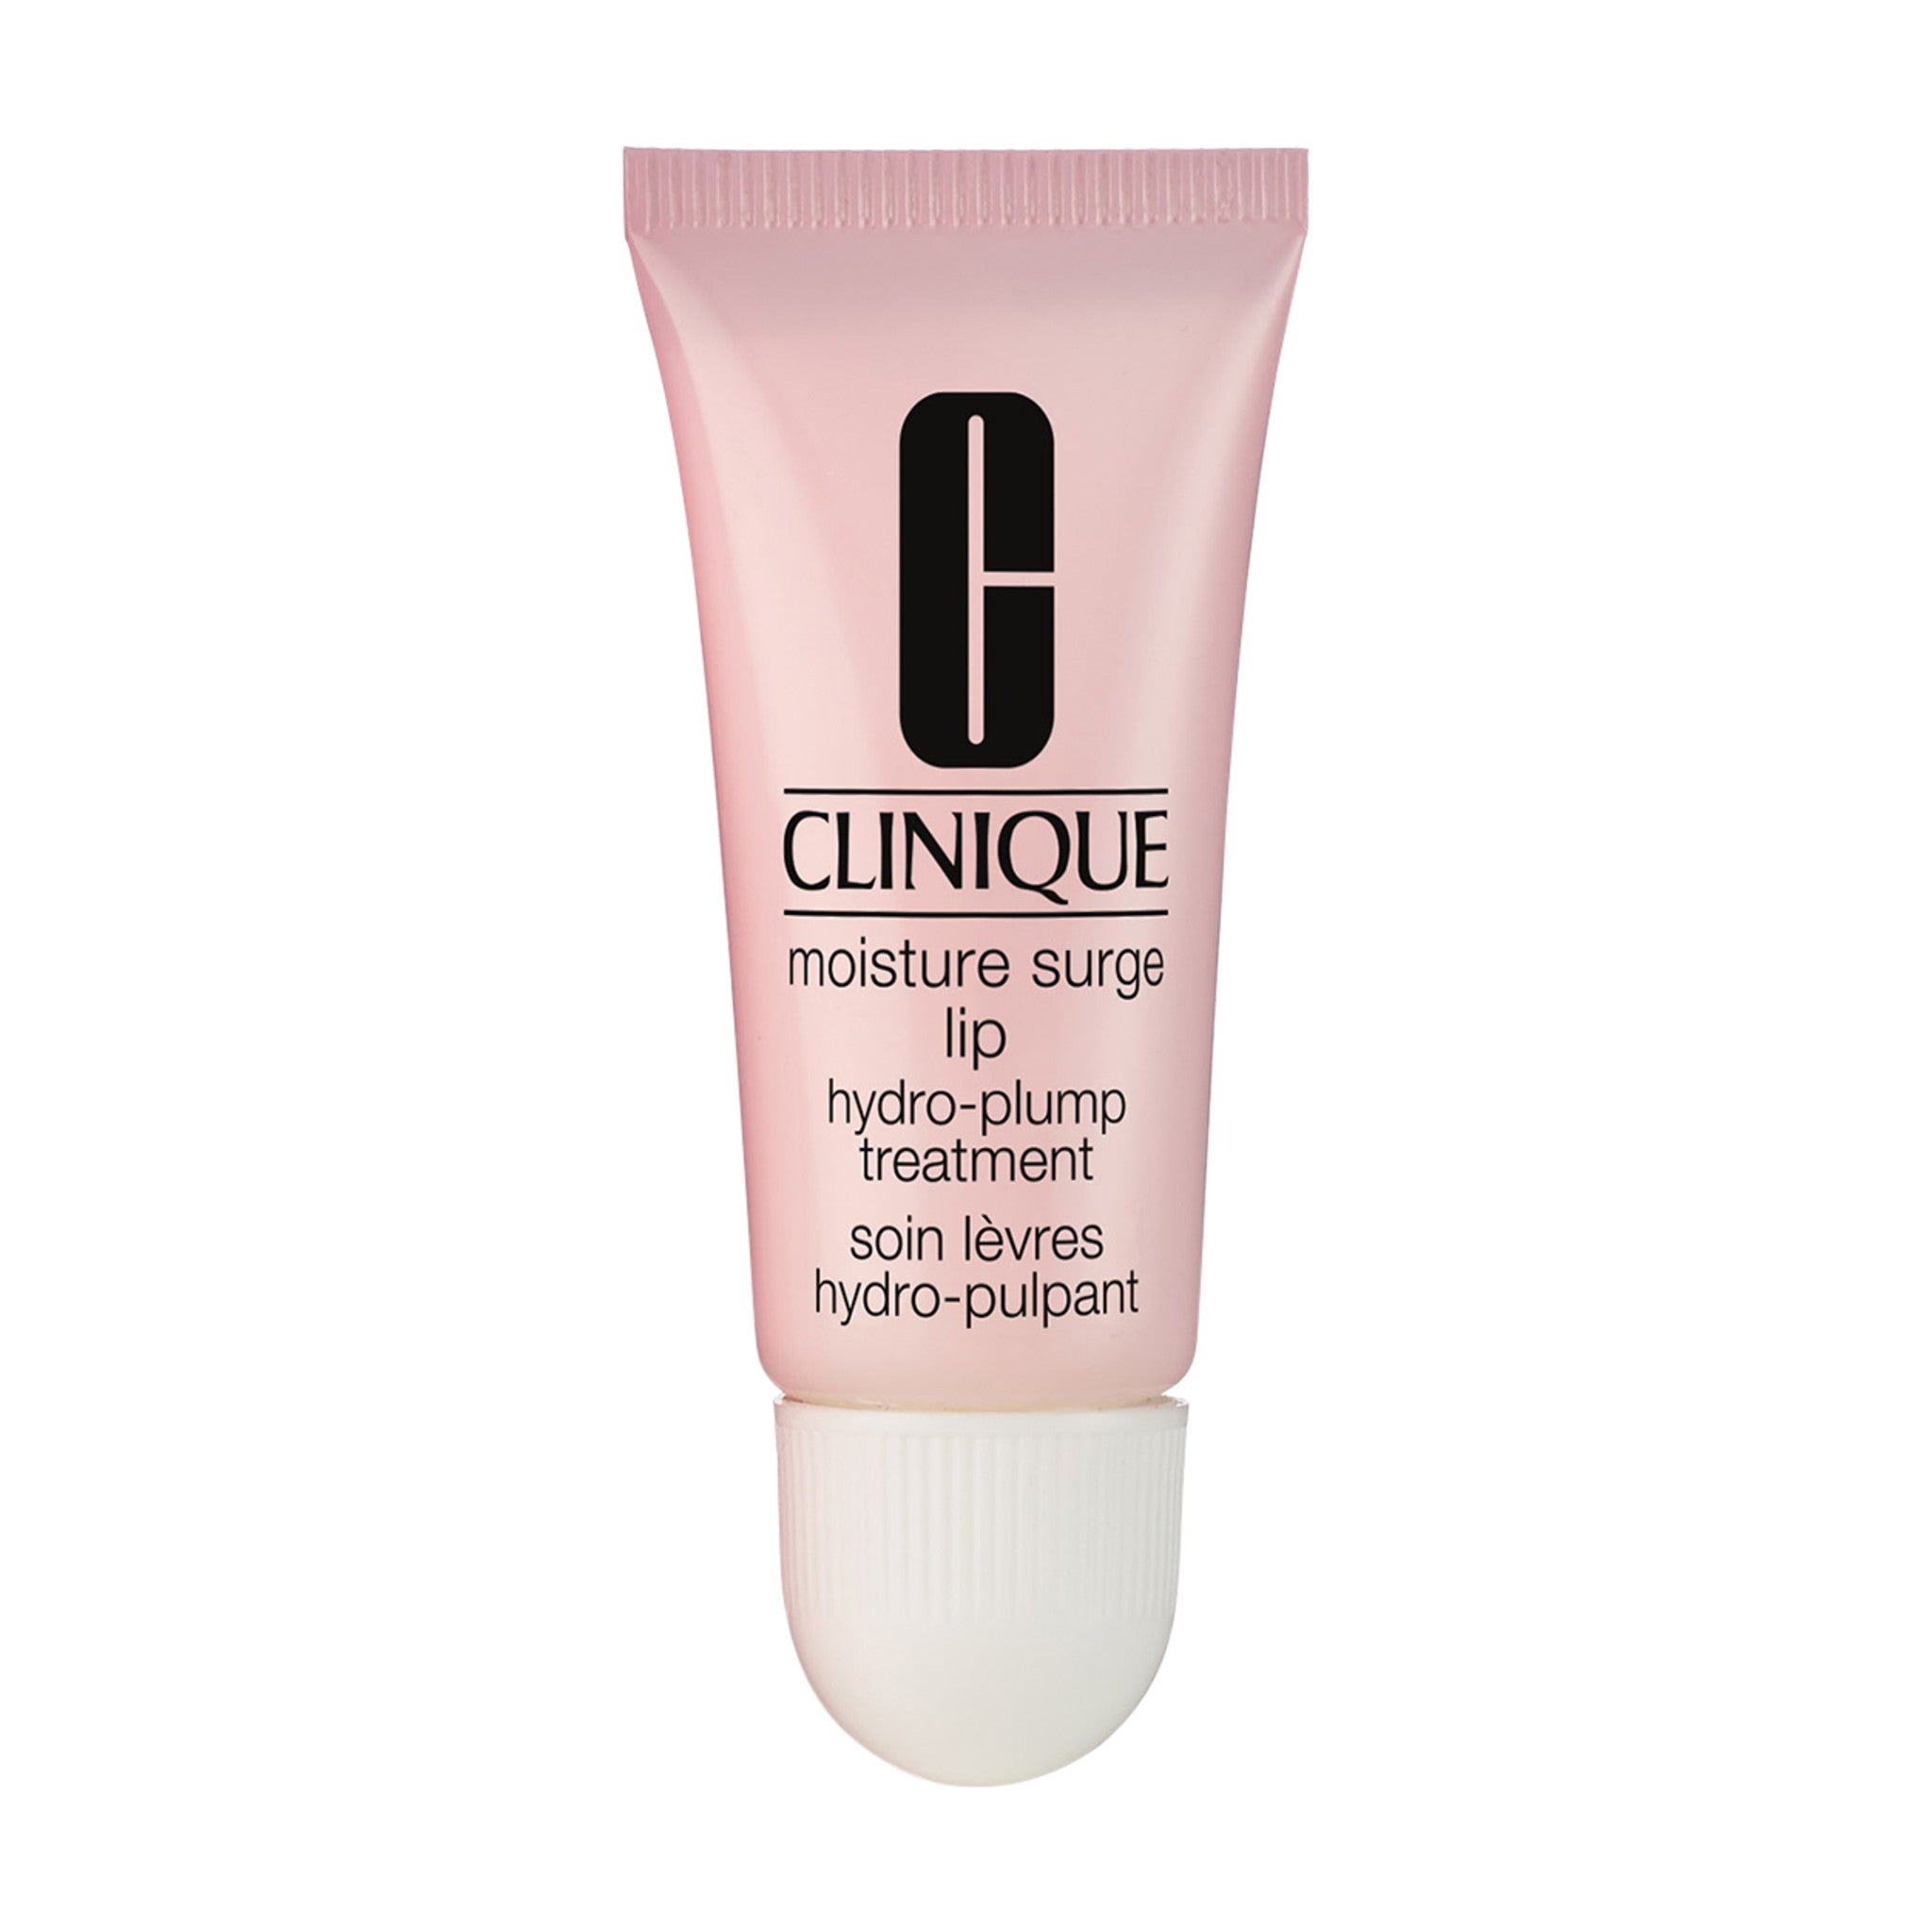 Clinique Moisture Surge Lip Hydro-Plump Treatment main image. This product is in the color clear